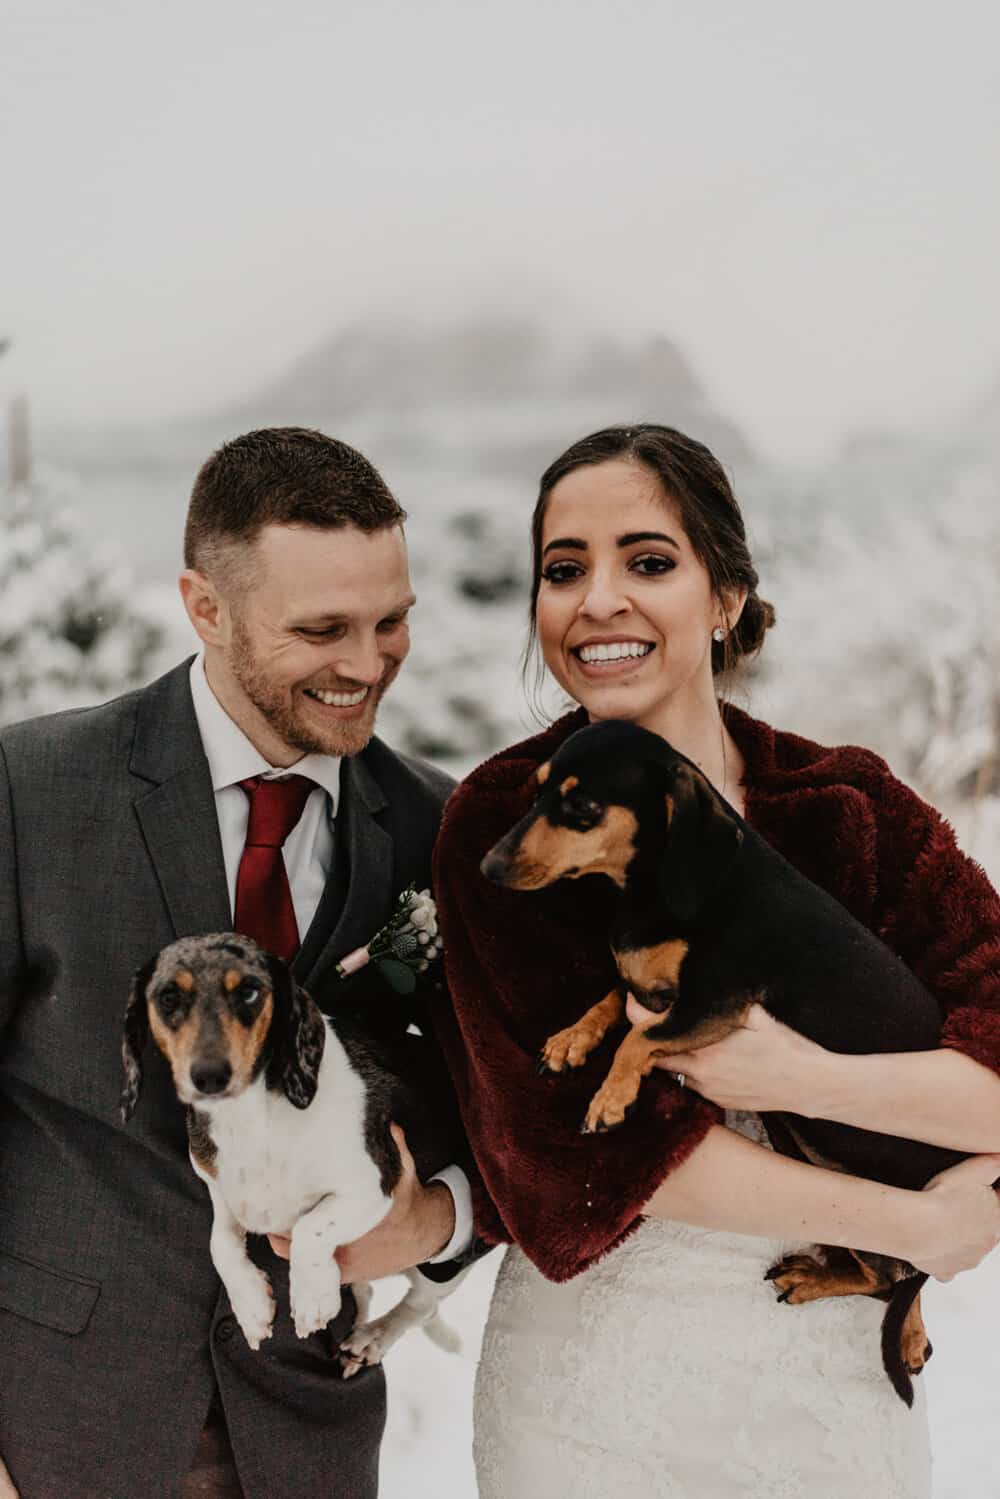 A couple poses for a photo in the snow with their dogs.